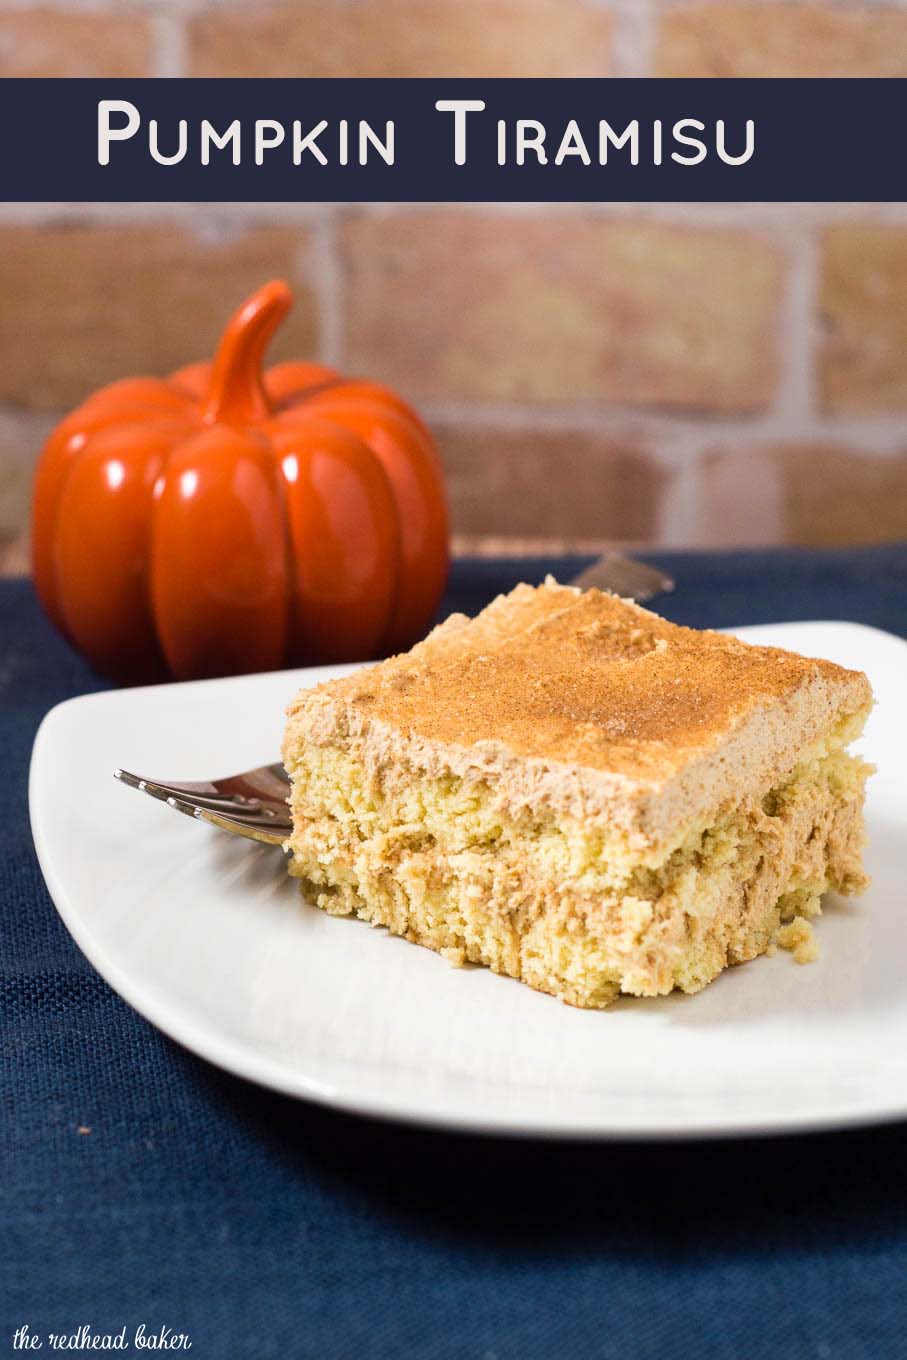 This pumpkin tiramisu is a light and airy twist on the Italian classic. It's no-bake and best when made ahead, which makes it perfect for a holiday dessert! #PumpkinWeek